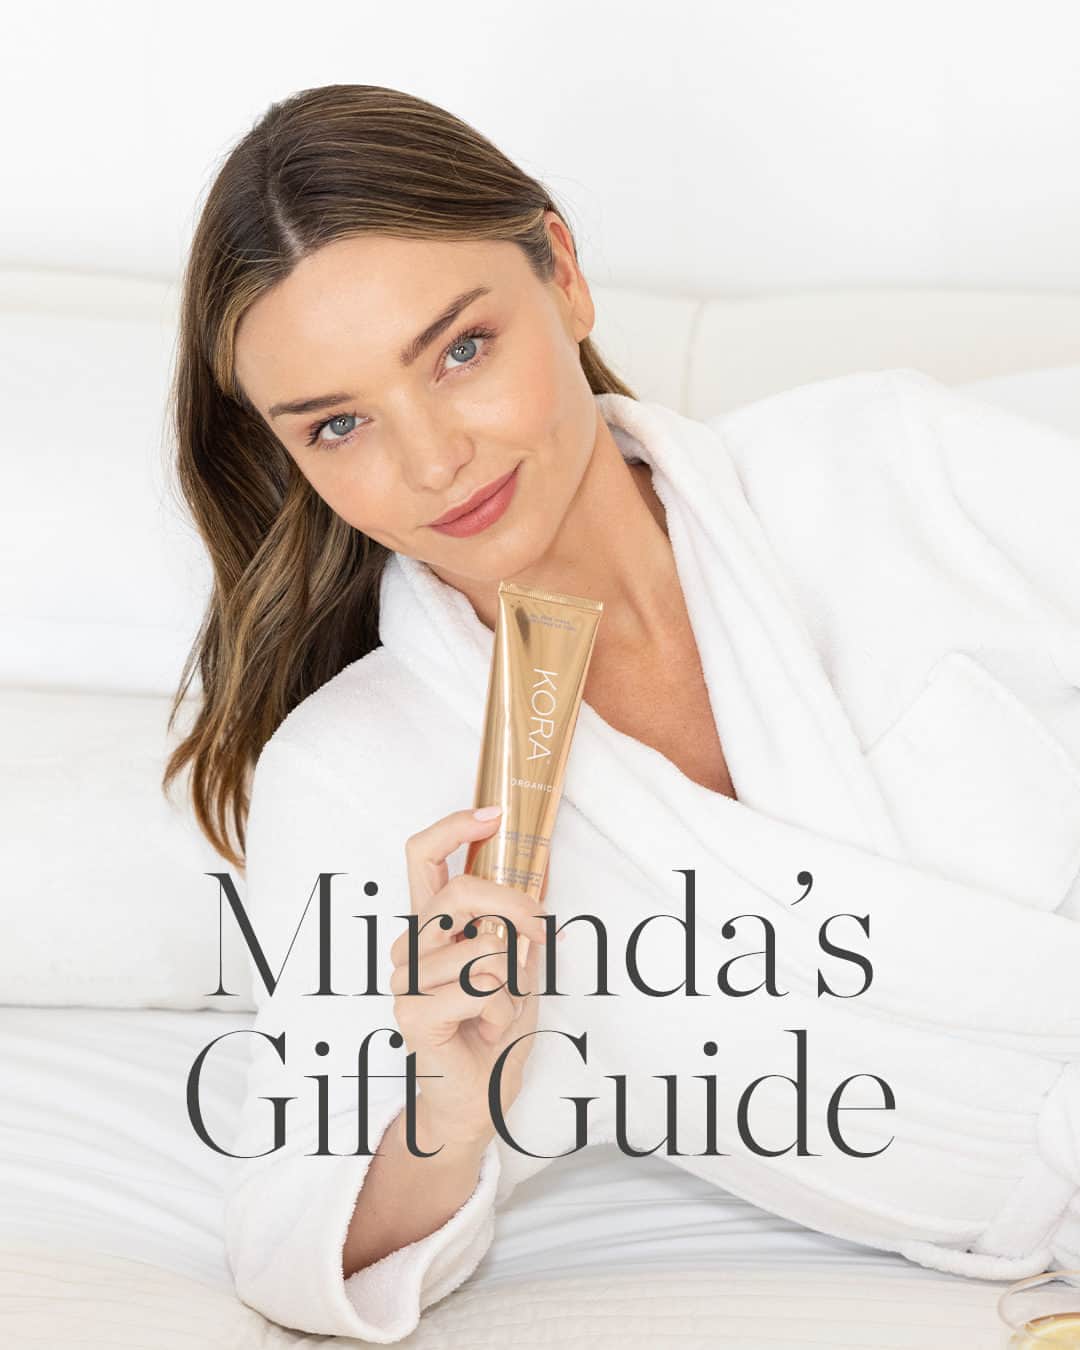 KORA Organicsのインスタグラム：「@mirandakerr’s Gift Guide is back! Our founder hand-picked her favorite products from wellness essentials to motherhood must-haves to bring you the ultimate guide, just in time for the holiday season. Visit our link in bio to find the perfect gift for everyone on your list 🎁✨」